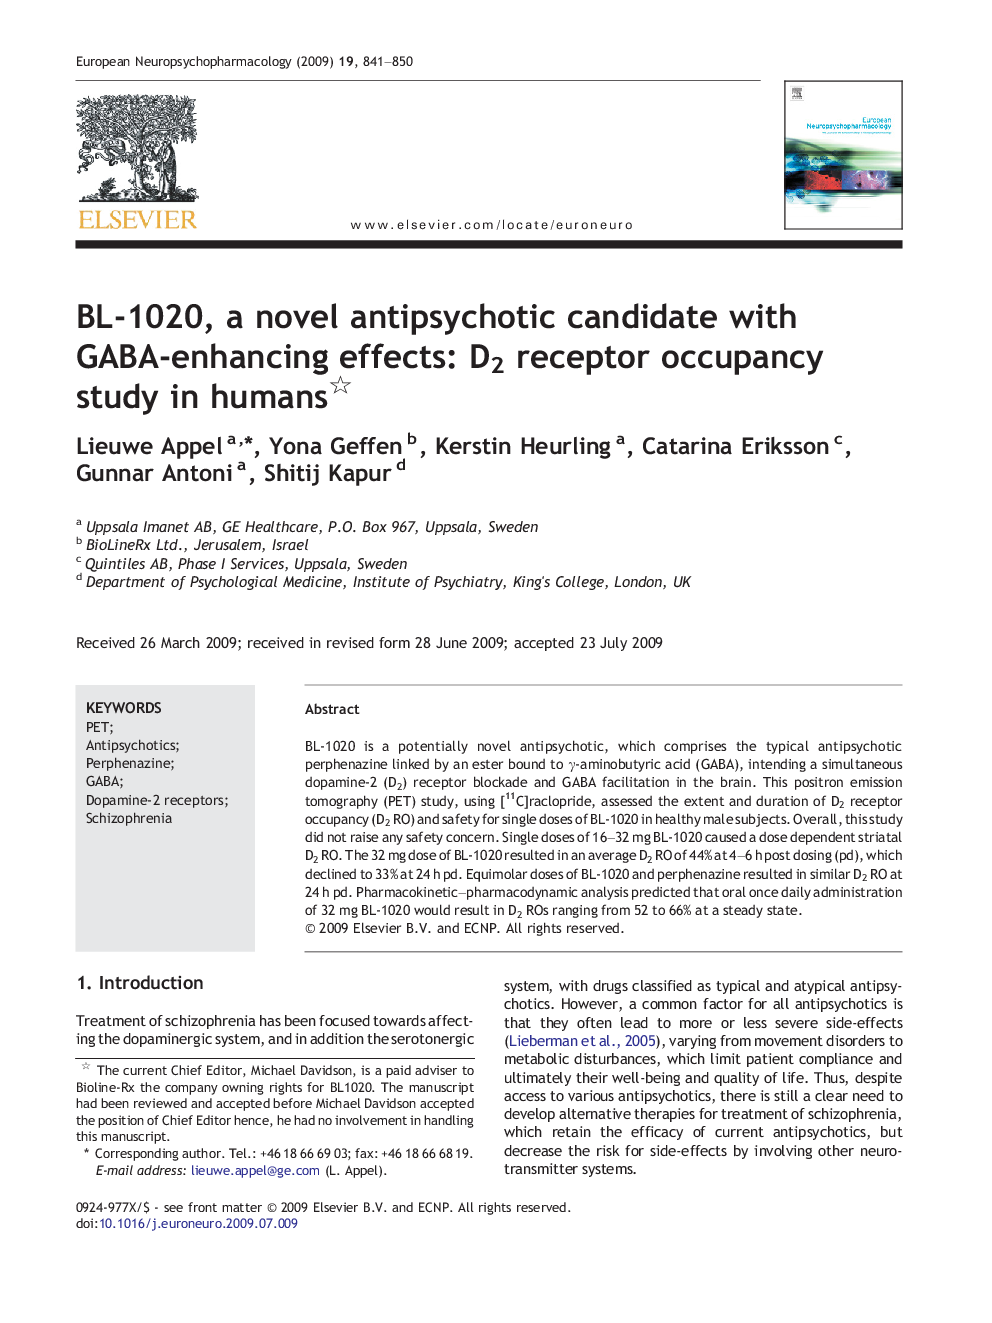 BL-1020, a novel antipsychotic candidate with GABA-enhancing effects: D2 receptor occupancy study in humans 